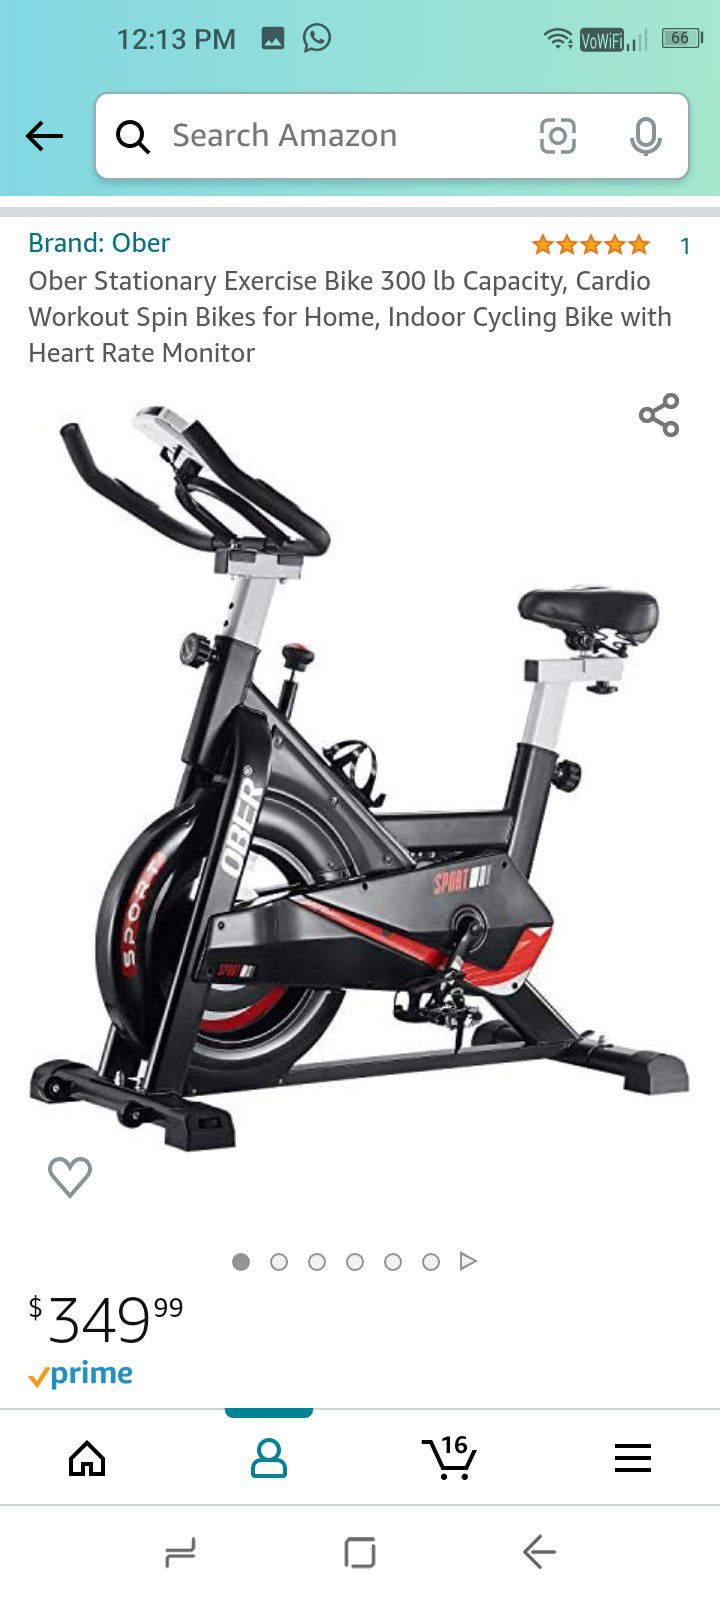 Ober Stationary Exercise Bike 300 lb Capacity, Cardio Workout Spin Bikes for Home, Indoor Cycling Bike with Heart Rate Monitor

